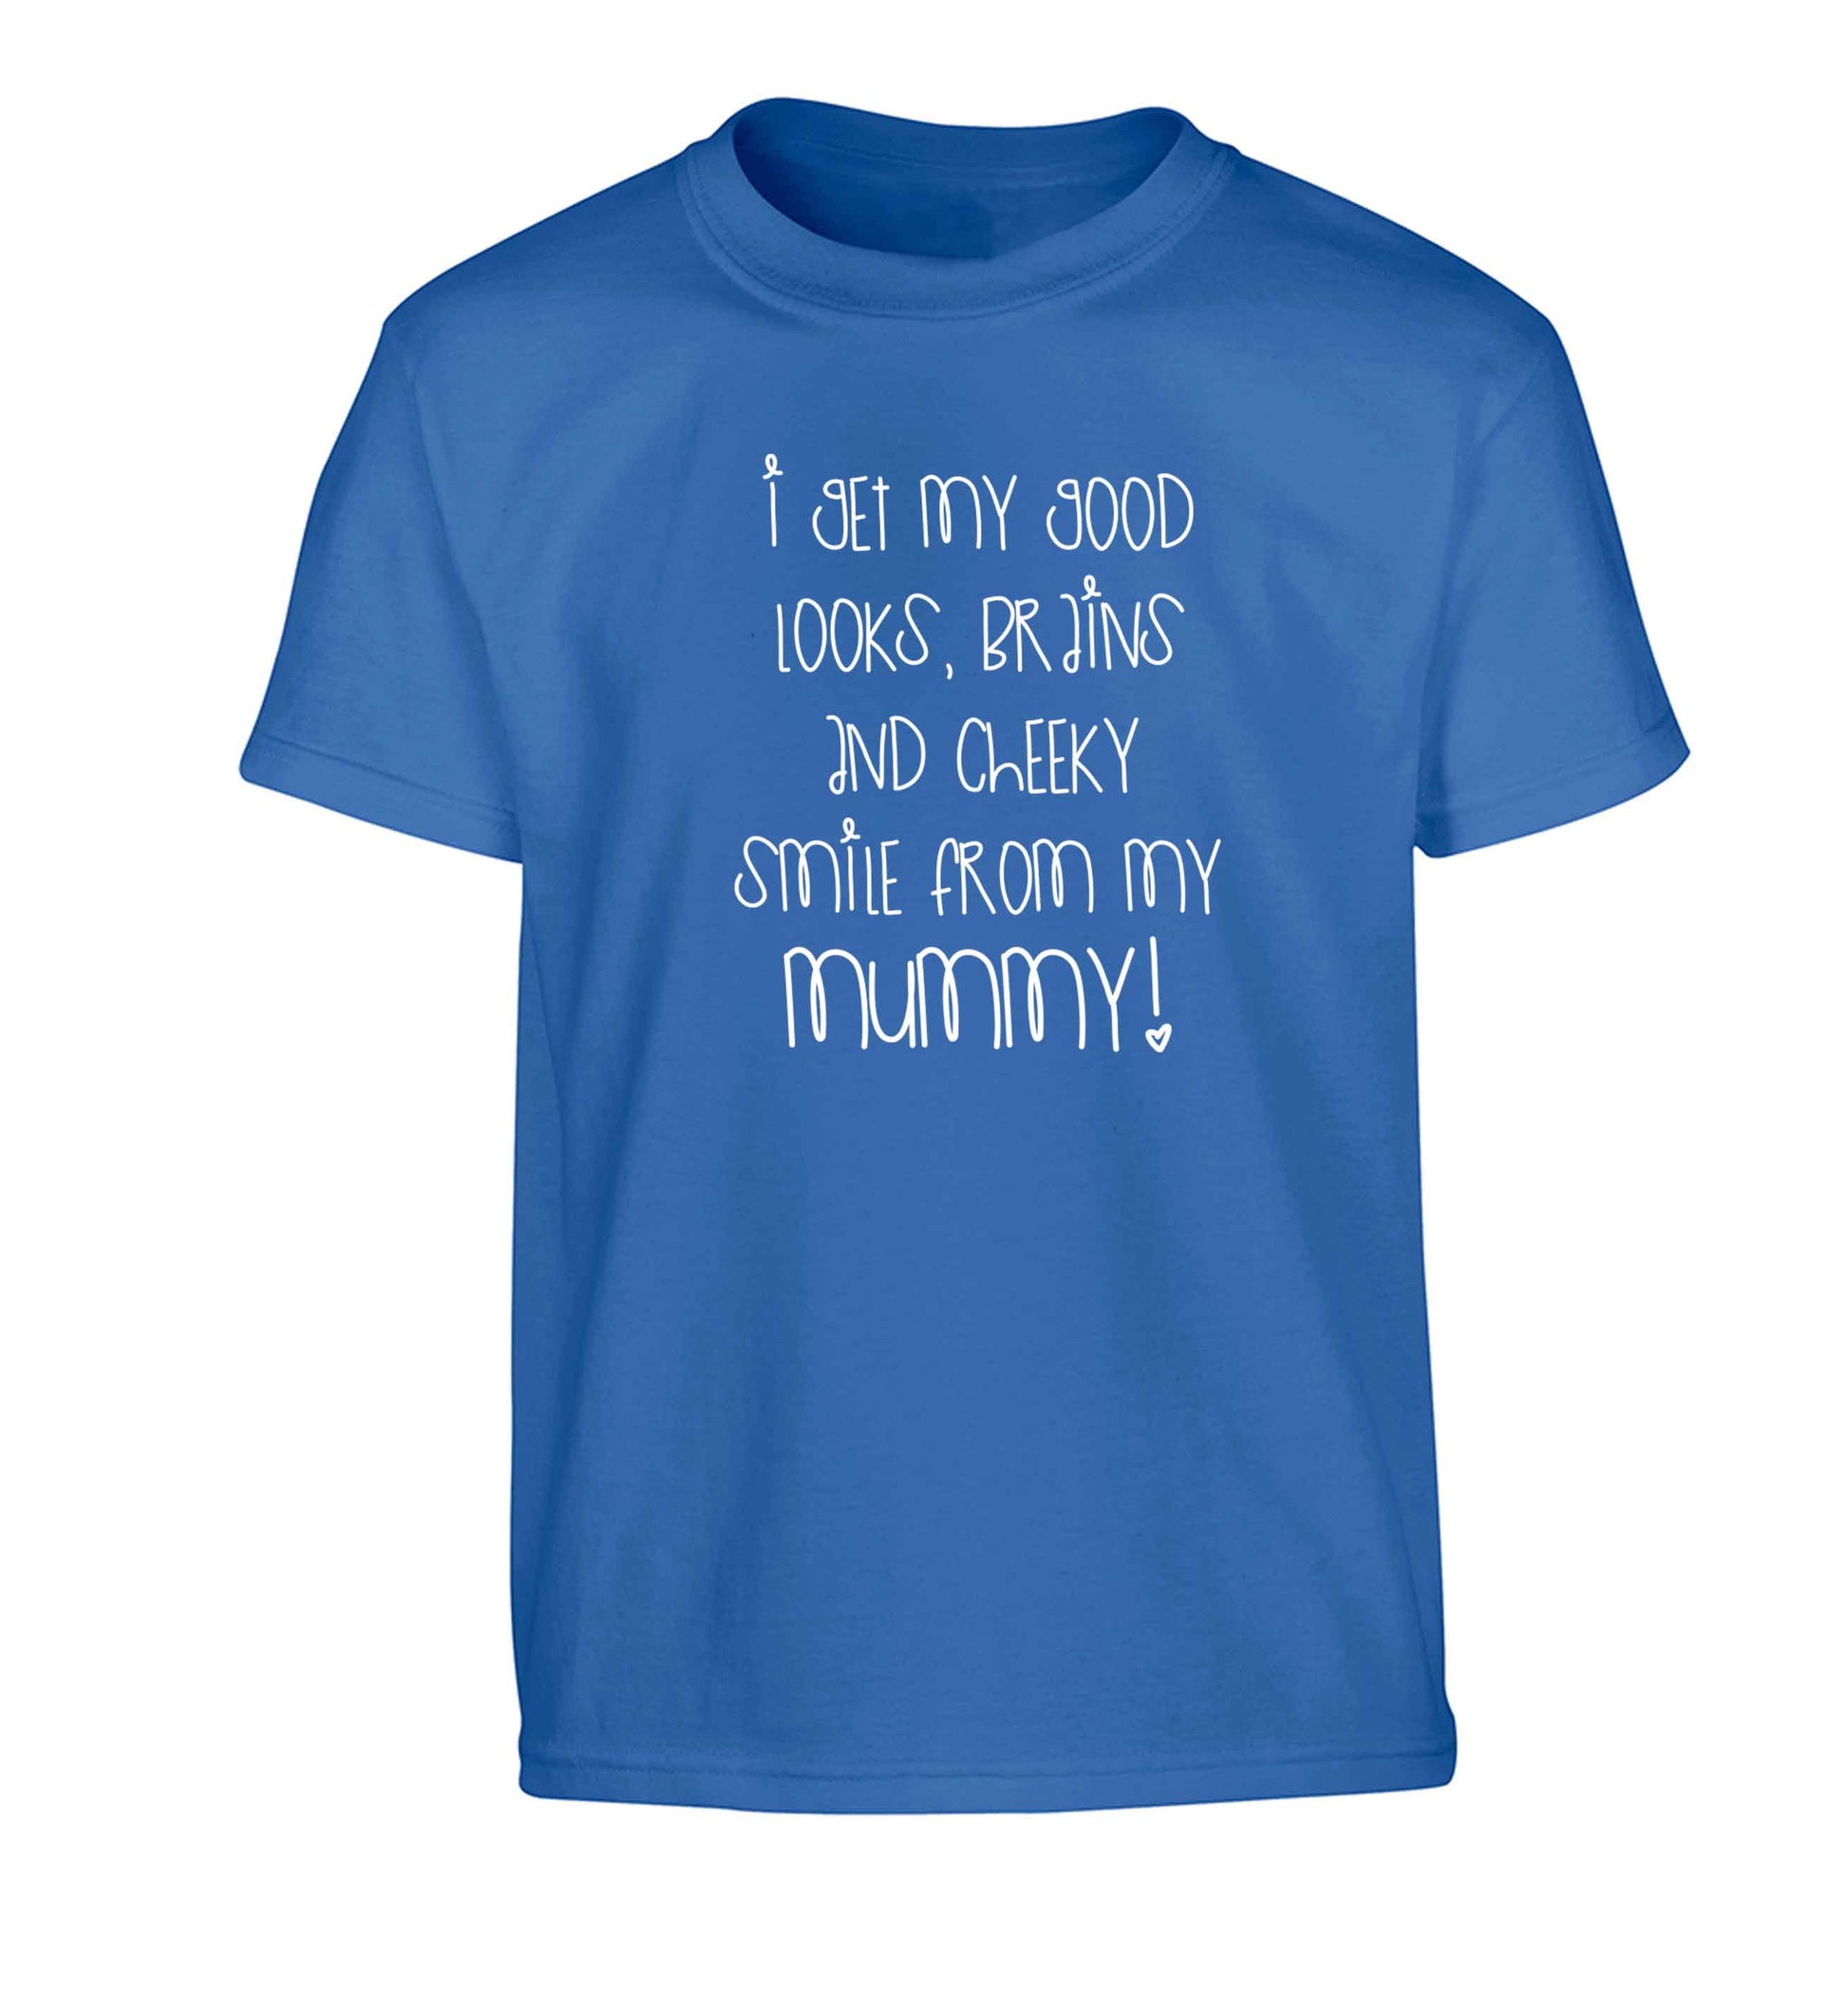 I get my good looks, brains and cheeky smile from my mummy Children's blue Tshirt 12-13 Years